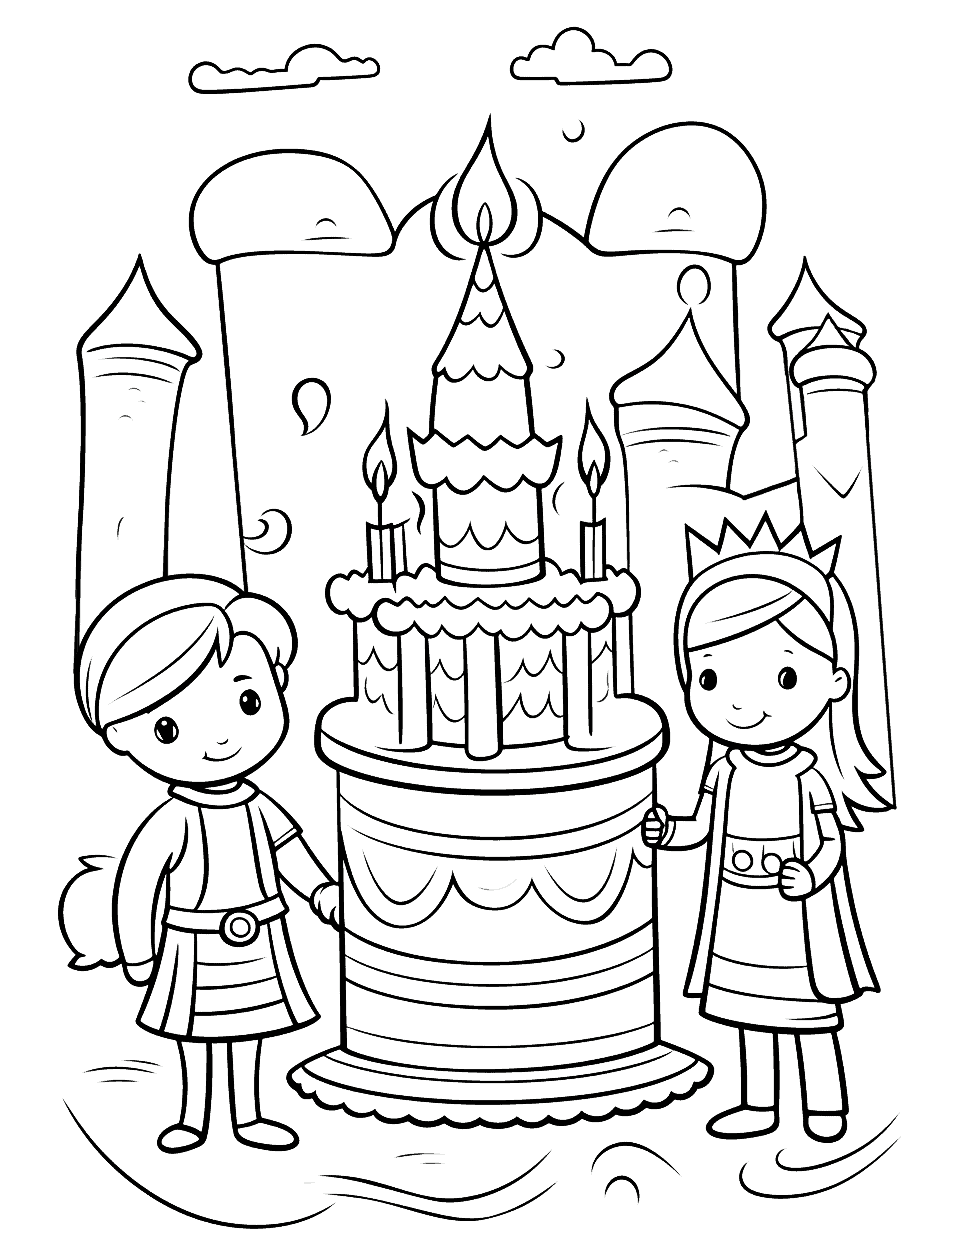 Medieval Castle Birthday Happy Coloring Page - A knight and a princess celebrating a birthday in a medieval castle with a large cake.